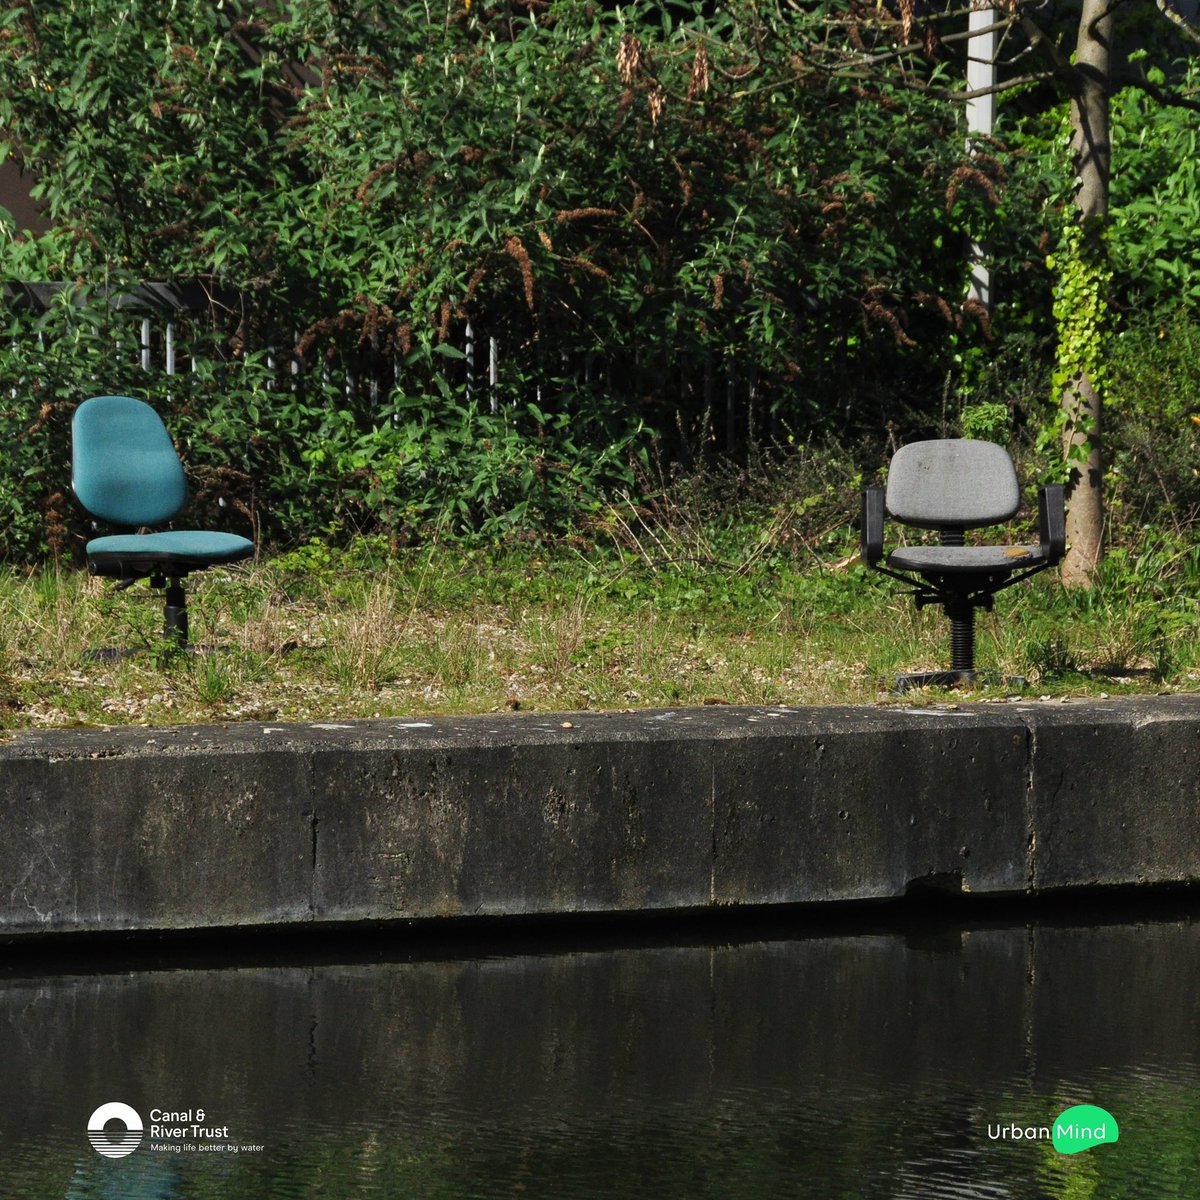 Urban Mind and the Canal & River Trust are collaborating on a nation-wide citizen science project exploring the mental health benefits of spending time beside water. We are recruiting Urban Mind Ambassadors to help deliver this grass-roots research. Visit bit.ly/31Dy3Ep